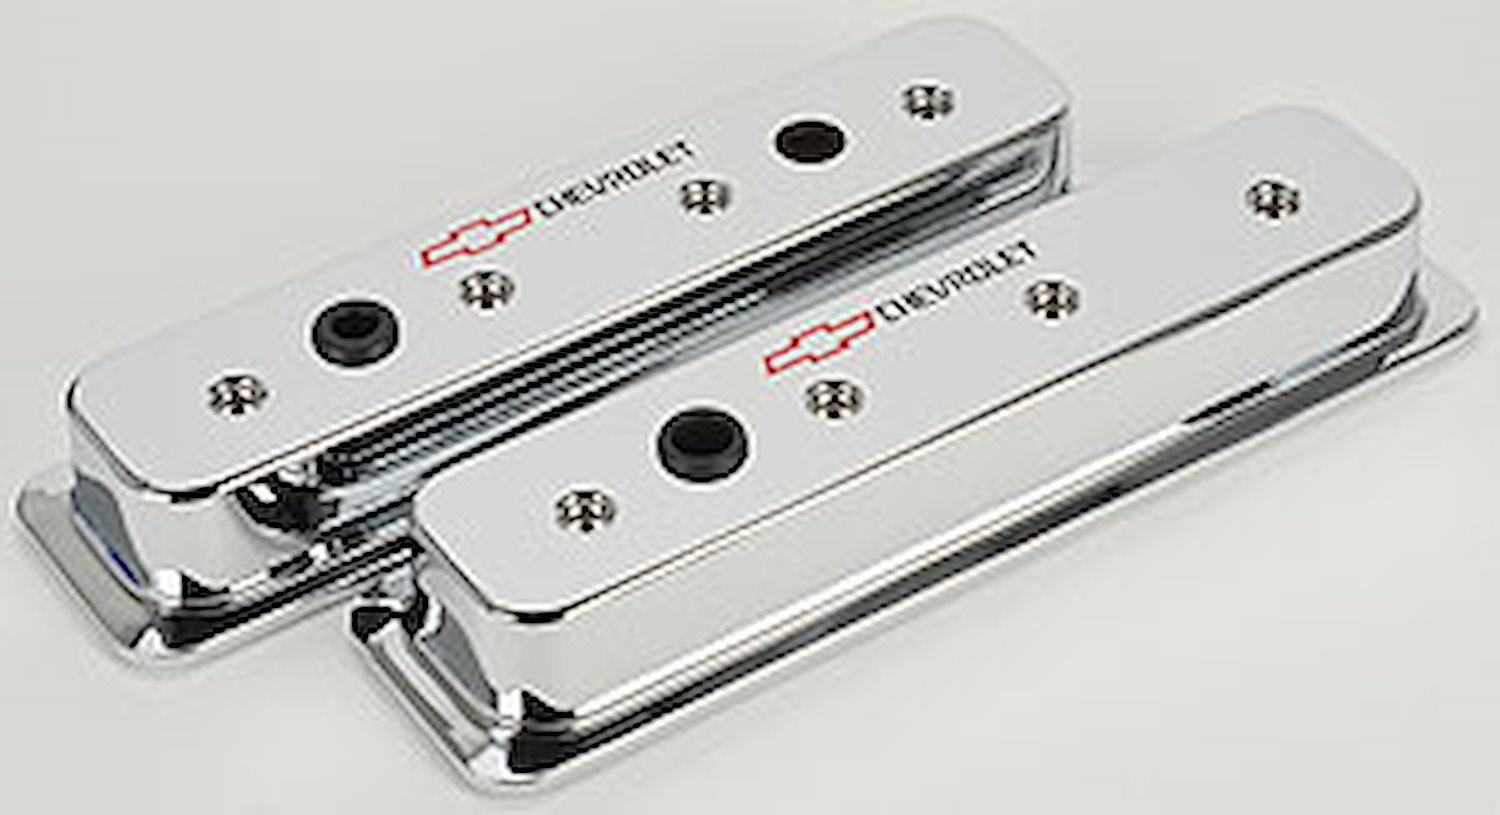 Die-Cast Aluminum Center Bolt Valve Covers for 1987-Up Small Block Chevy in Chrome Finish